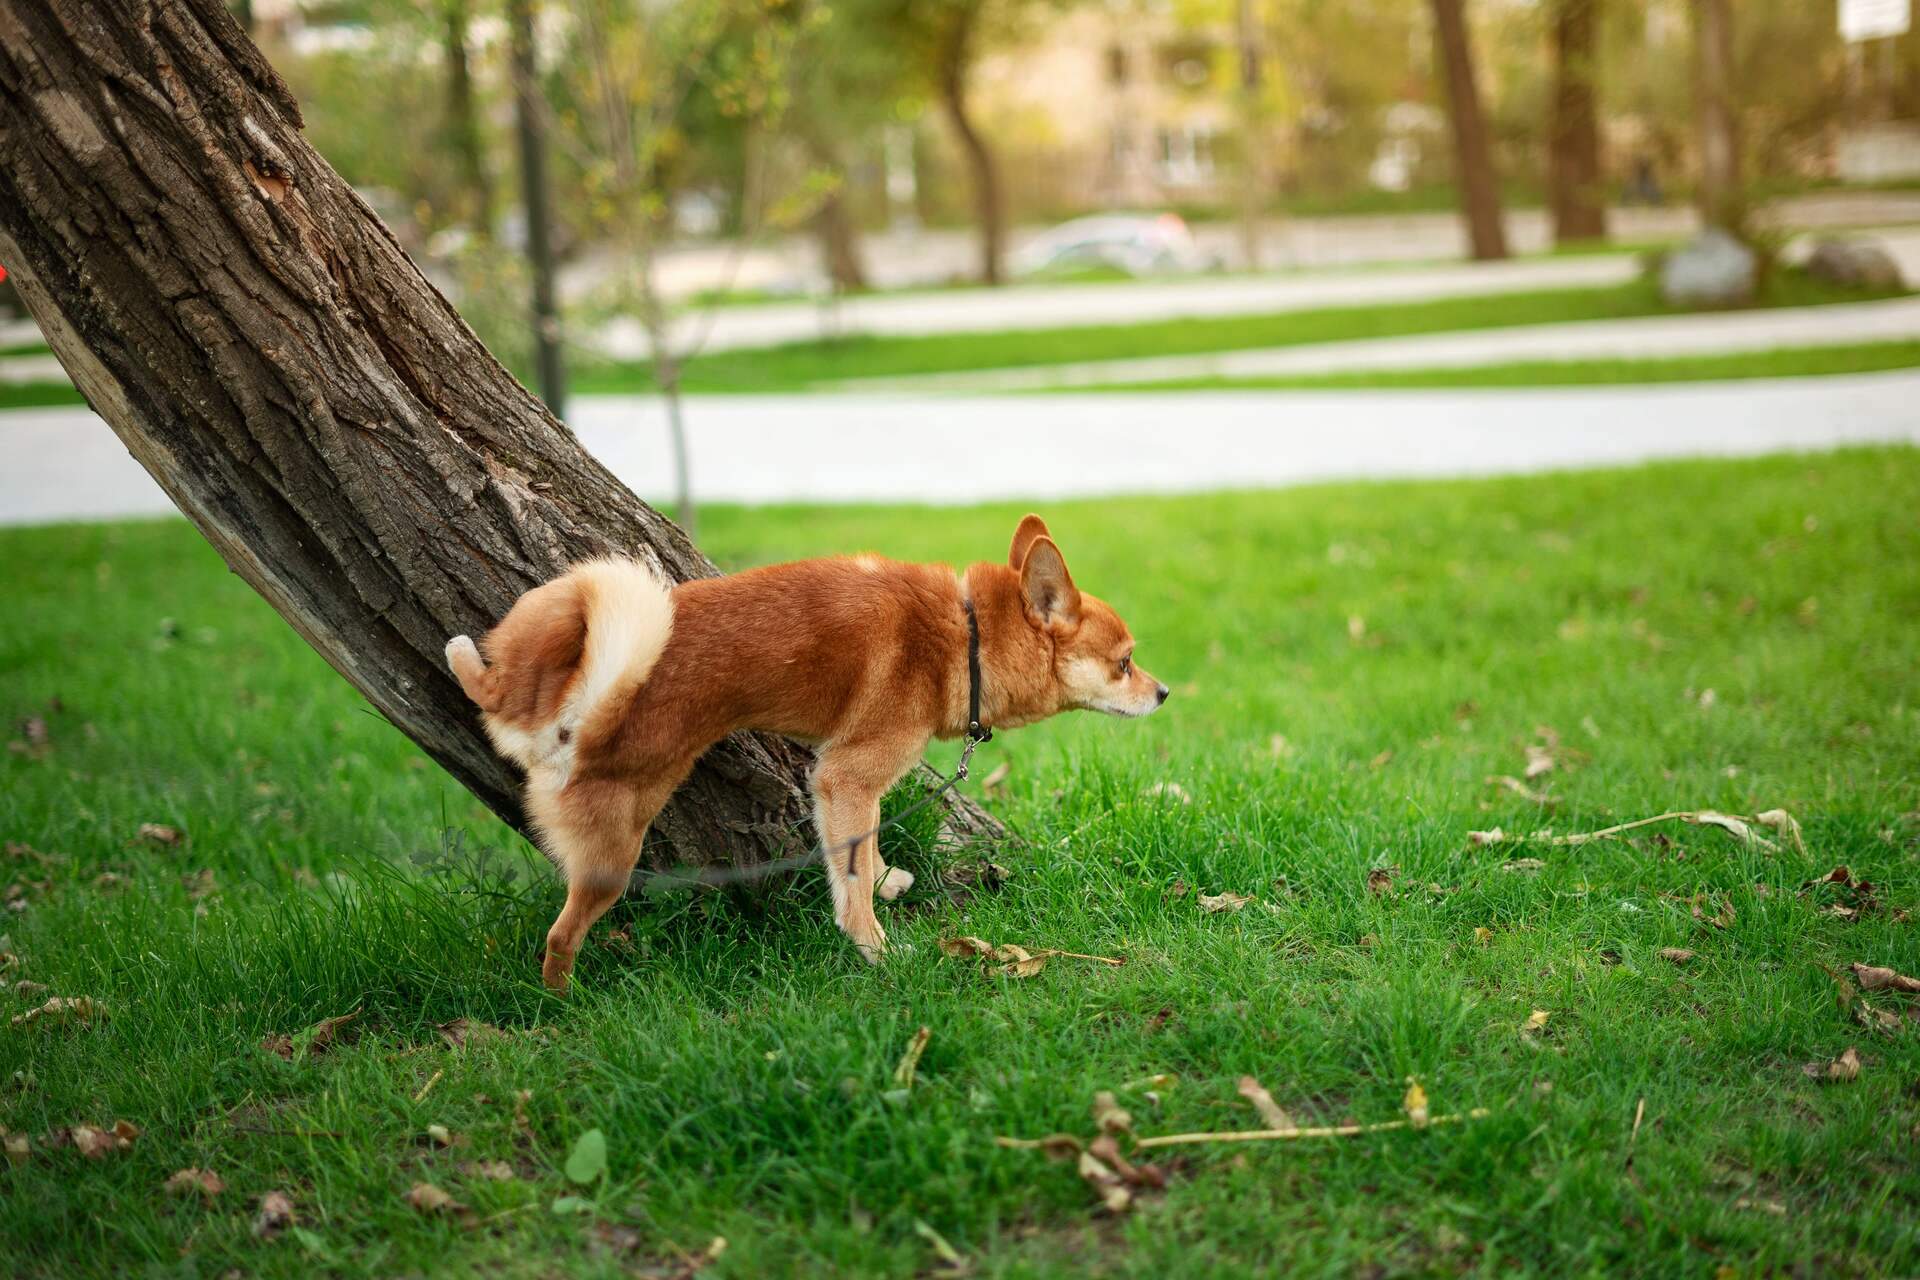 A dog peeing against the side of a tree